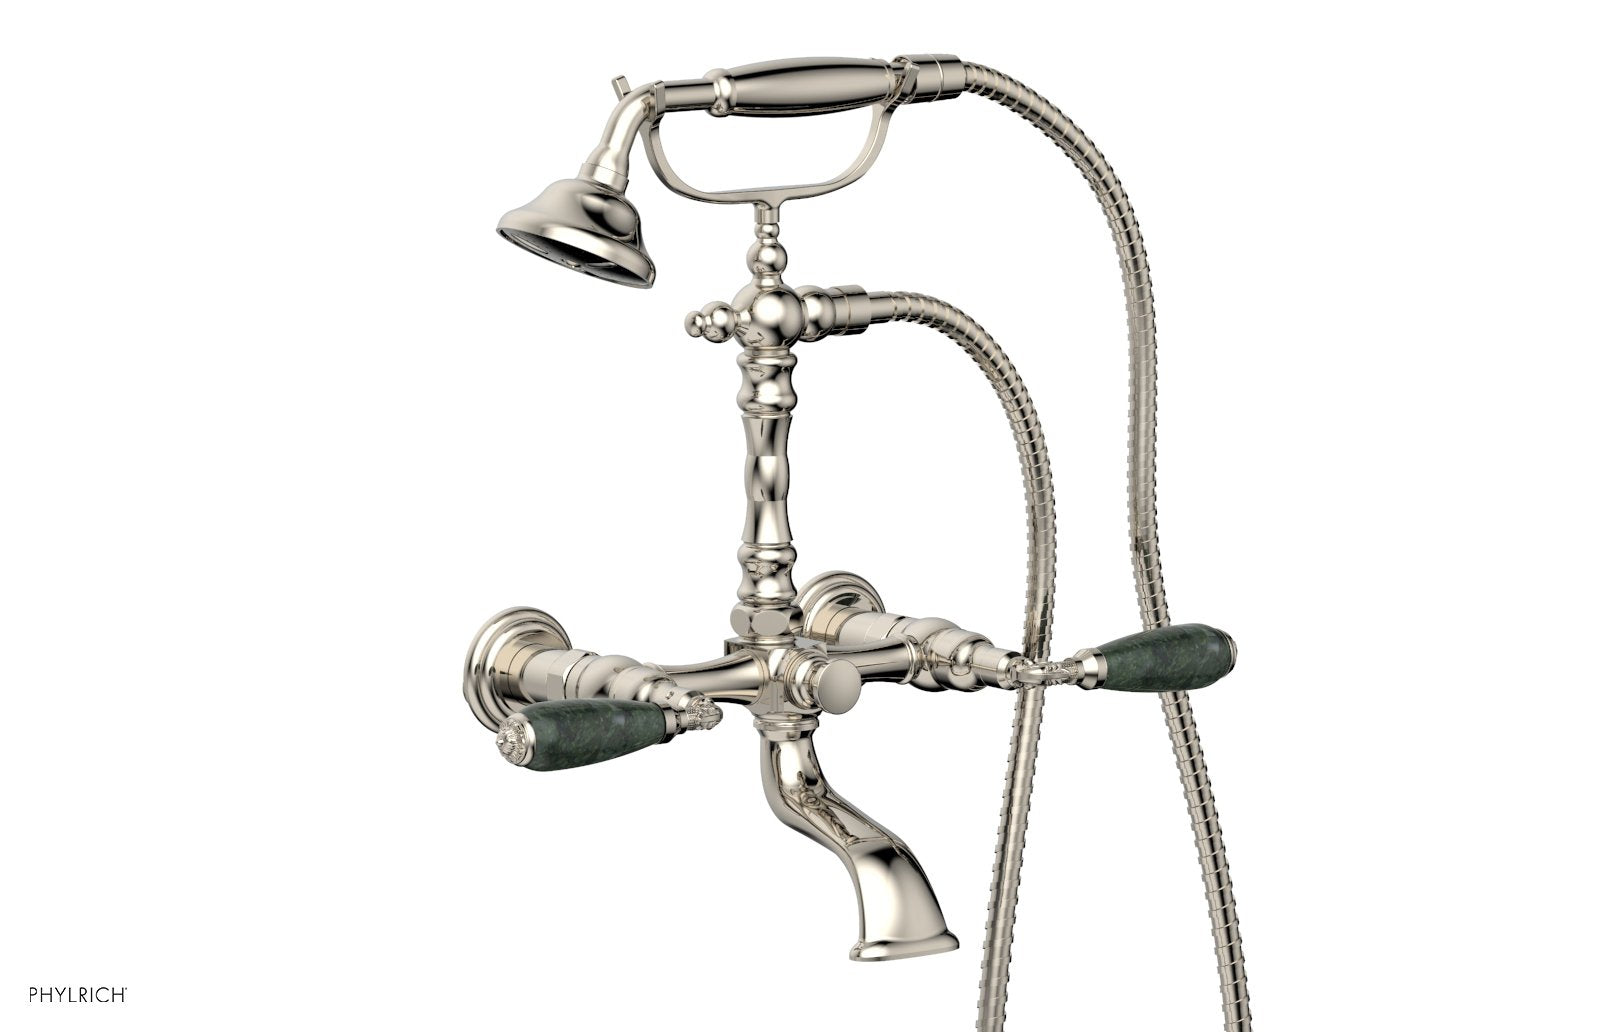 Phylrich VALENCIA Exposed Tub & Hand Shower - Green Marble Lever Handle